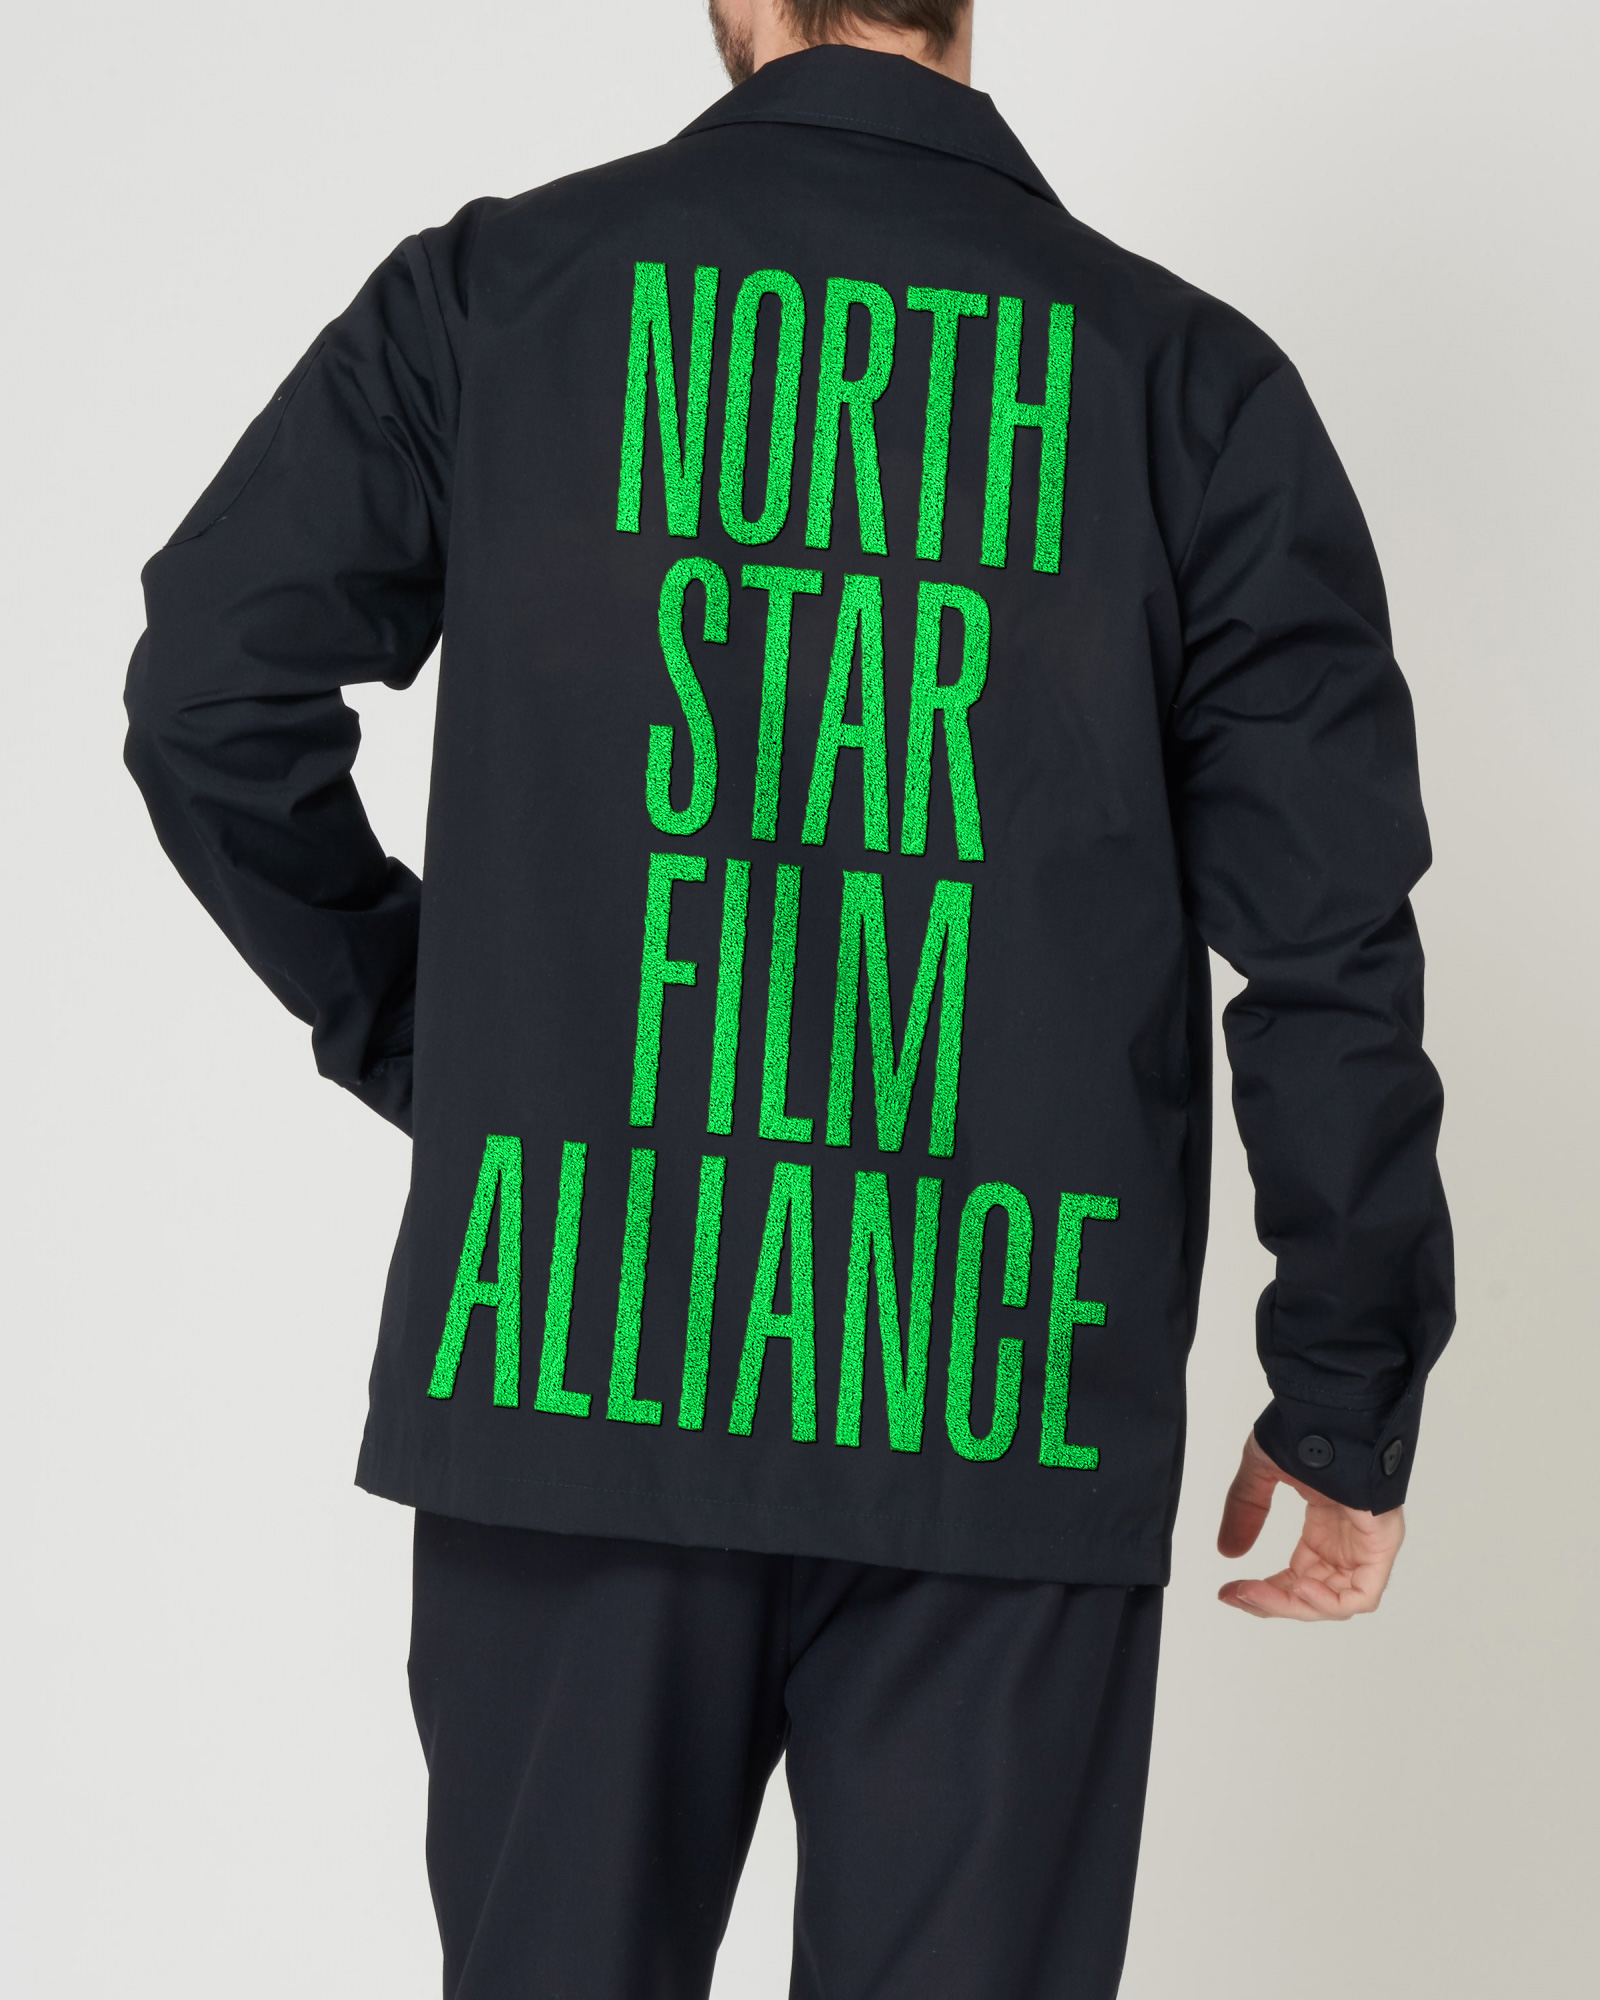 New Logo and Identity for North Star Film Alliance by BOND